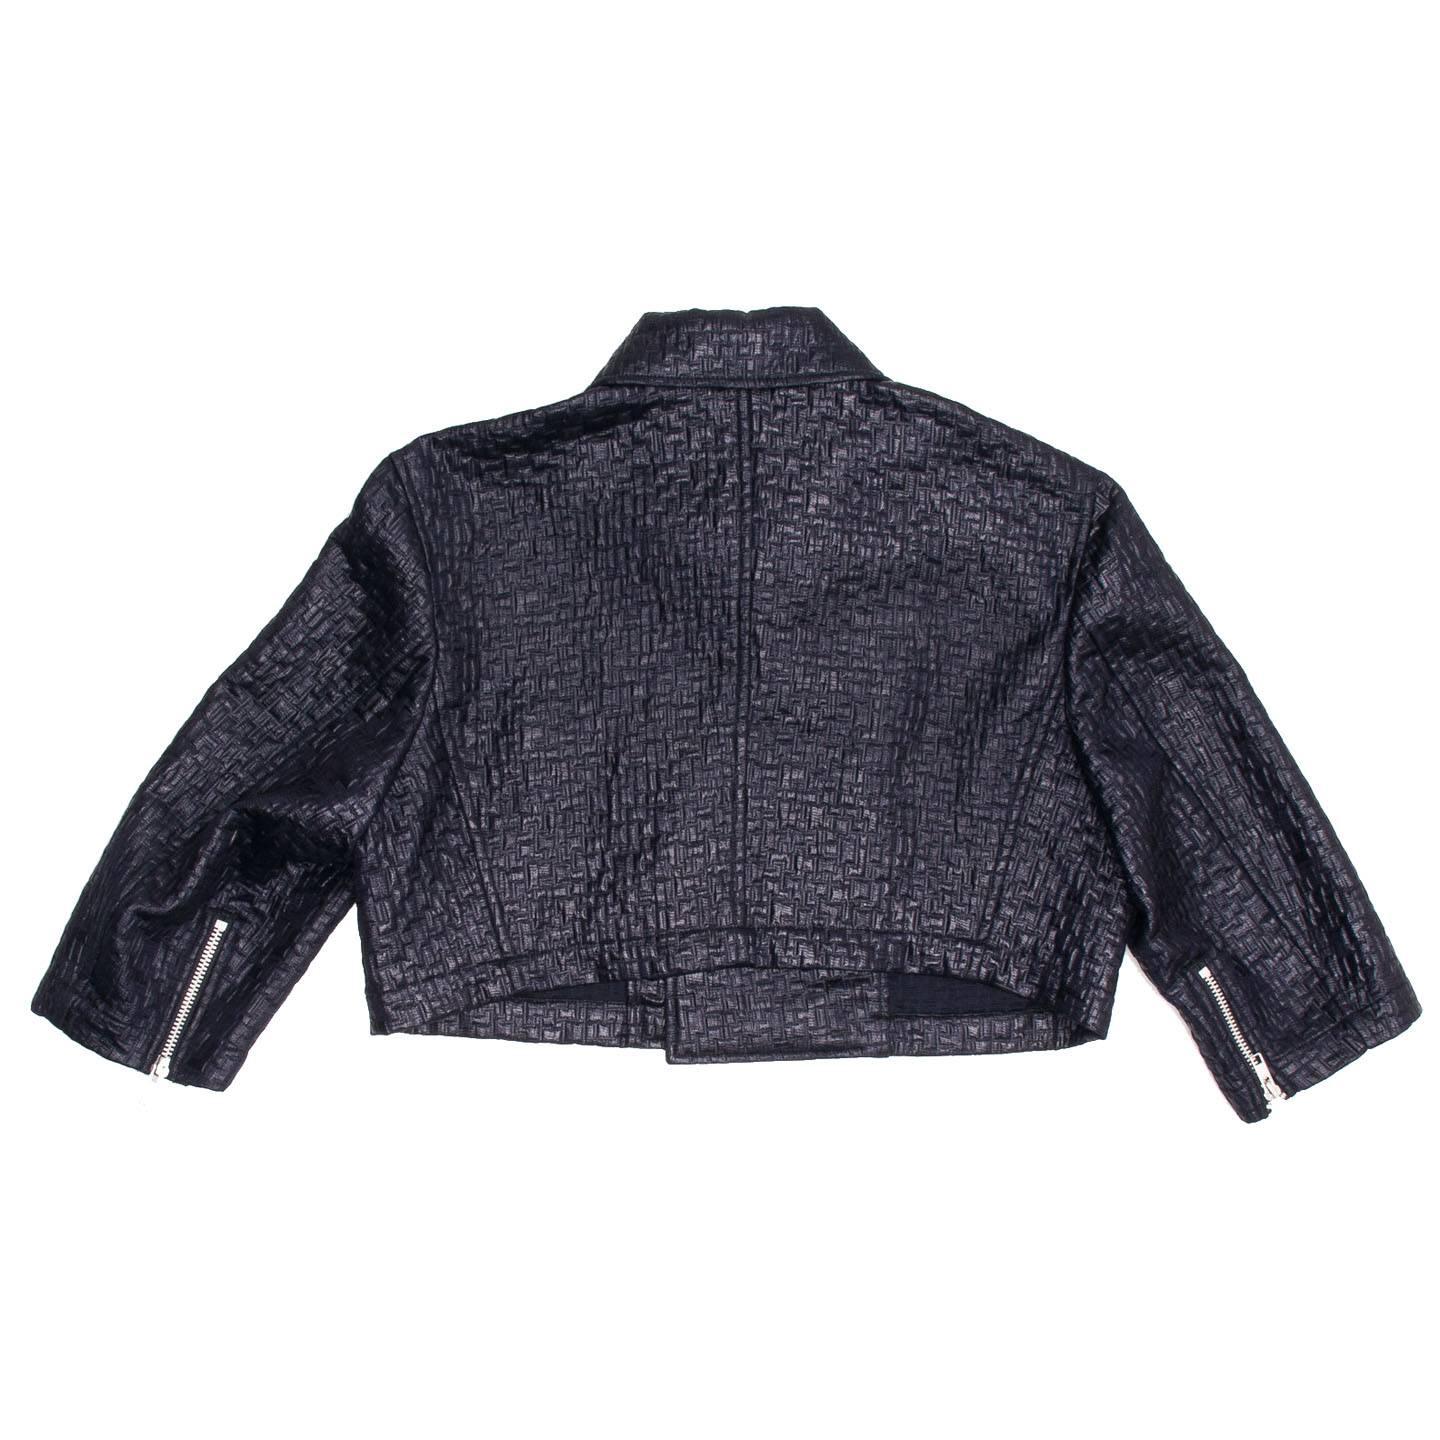 Ink blue cropped motorcycle jacket in an embossed looking textured fabric. The zips on cuffs, pockets and front opening are chunky and silver to contrast the soft elegant and sheeny fabric. The sleeves are 3/4 length, simple and elegant. Made in